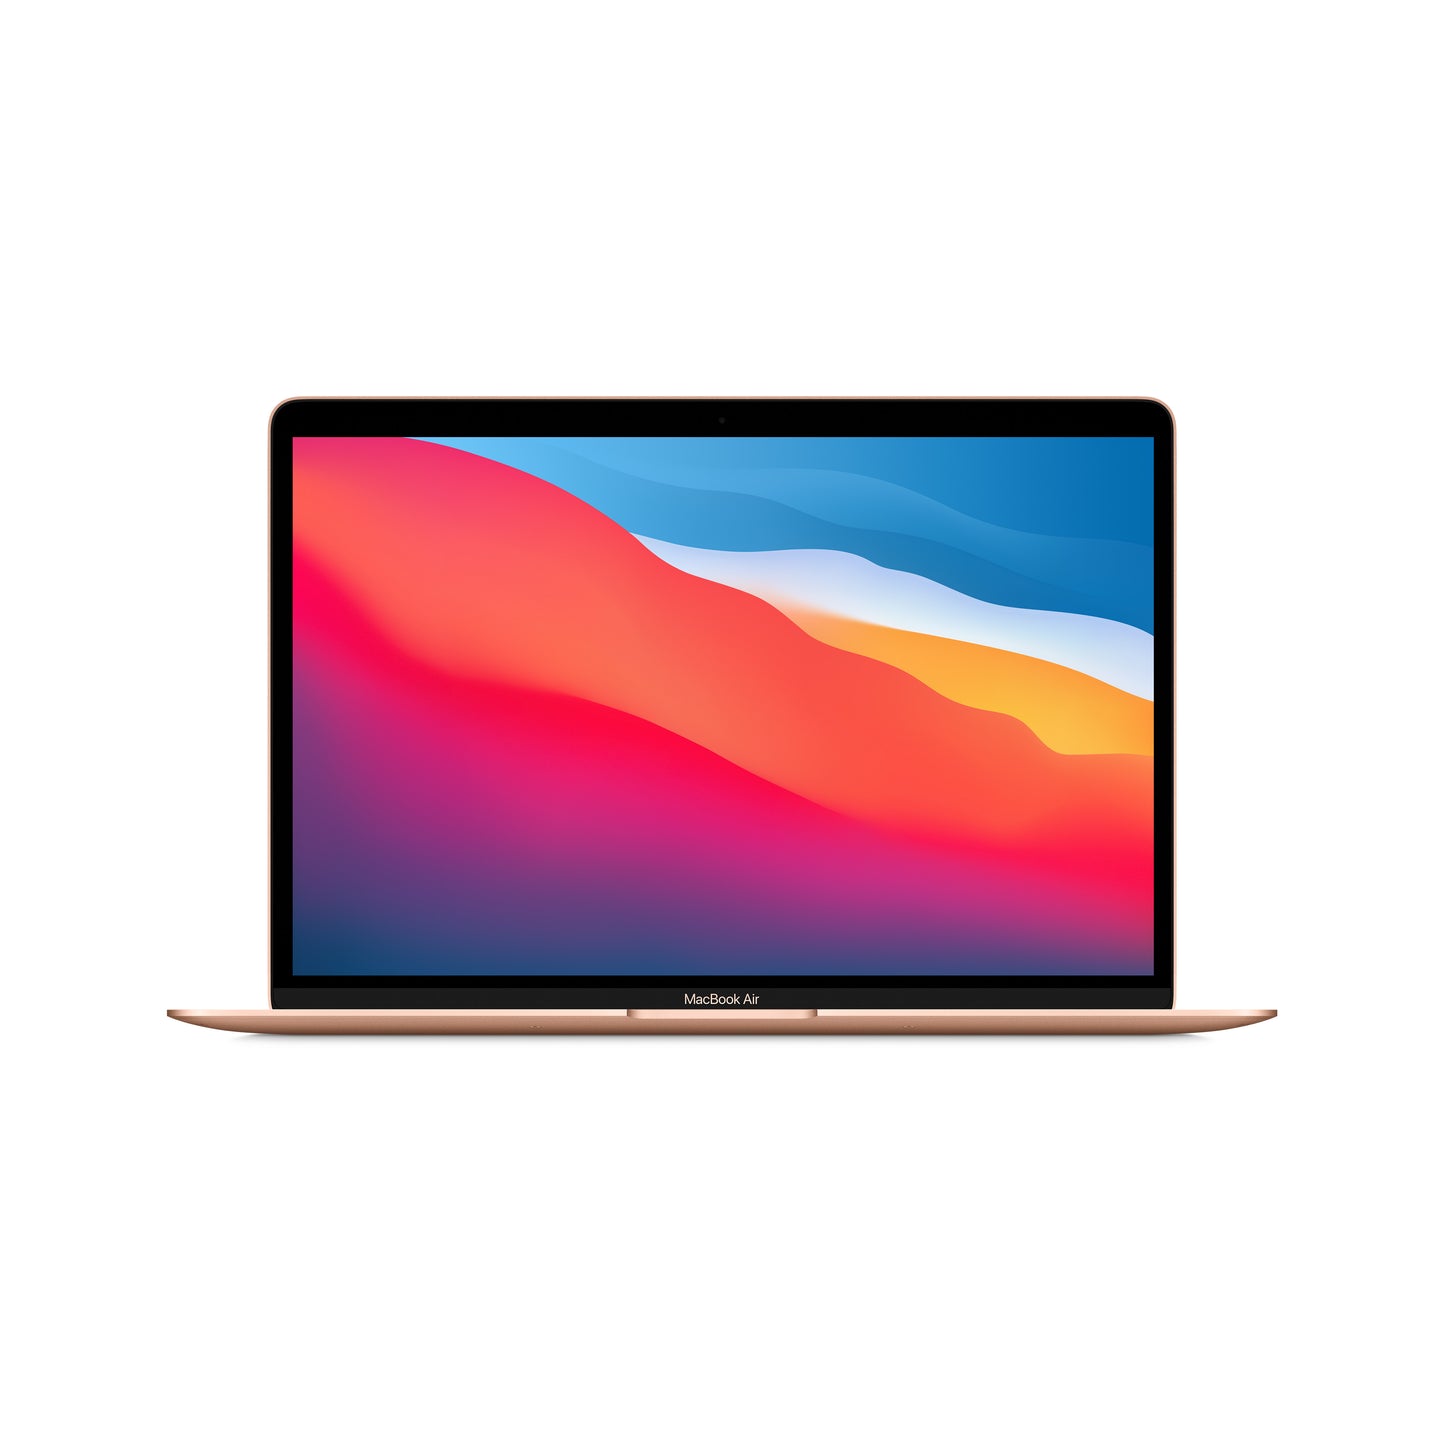 Apple 2020 MacBook Air Laptop: Apple M1 Chip, 13-inch Retina Display, 8GB RAM, 256GB SSD Storage, Backlit Keyboard, FaceTime HD Camera, Touch ID. Works with iPhone/iPad; Gold; Arabic/English